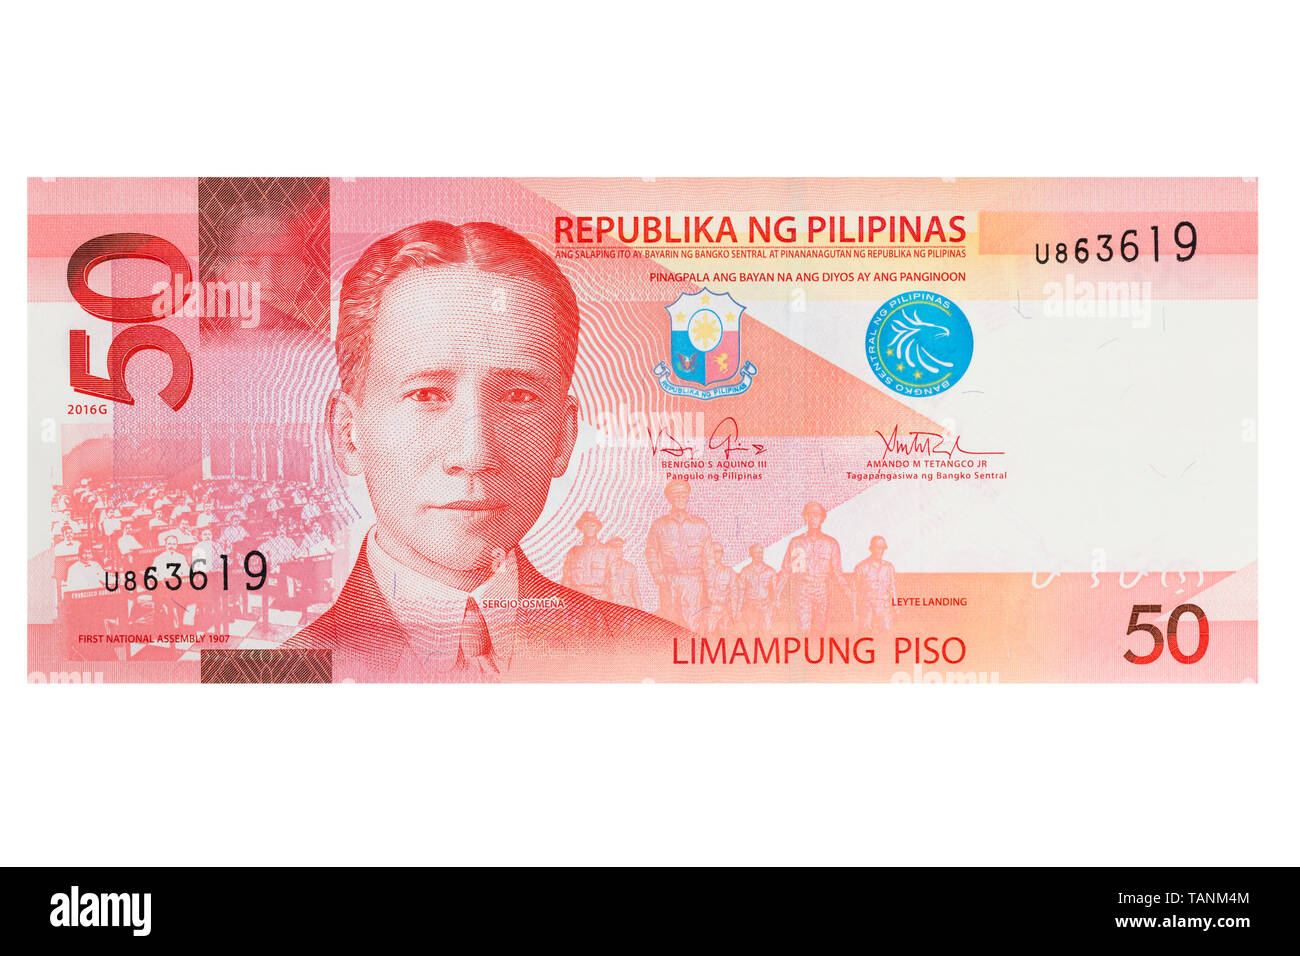 Philippine fifty peso banknote on a white background Stock Photo